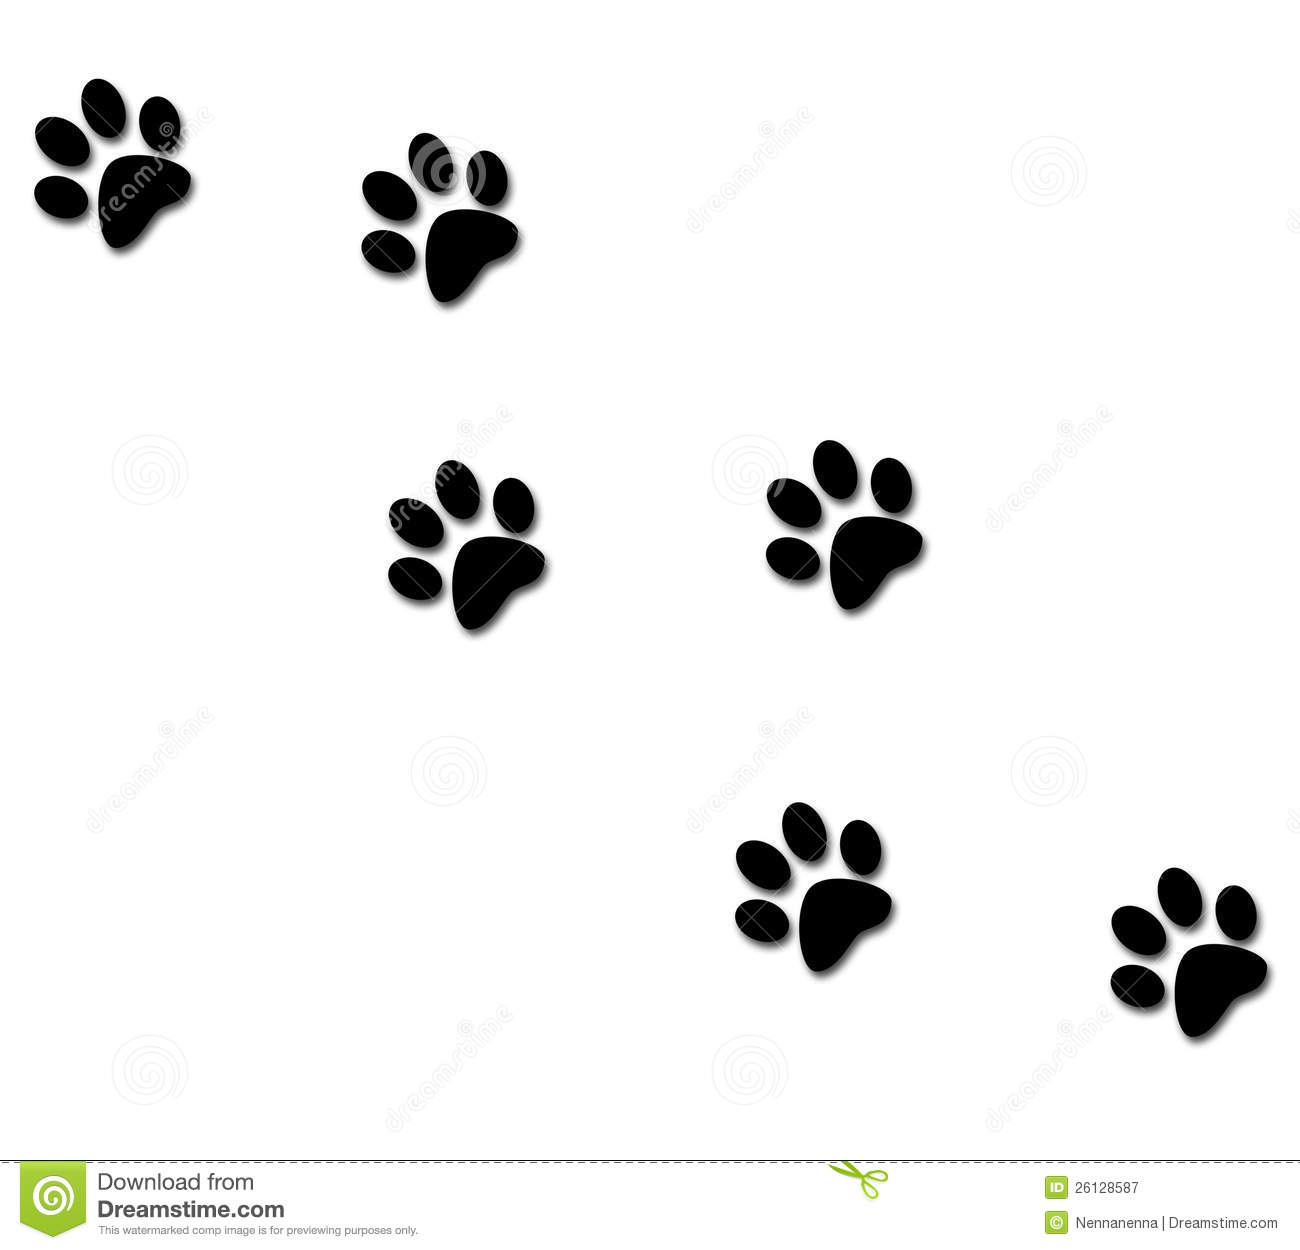 Puppy Paws Clipart   Clipart Panda   Free Clipart Images